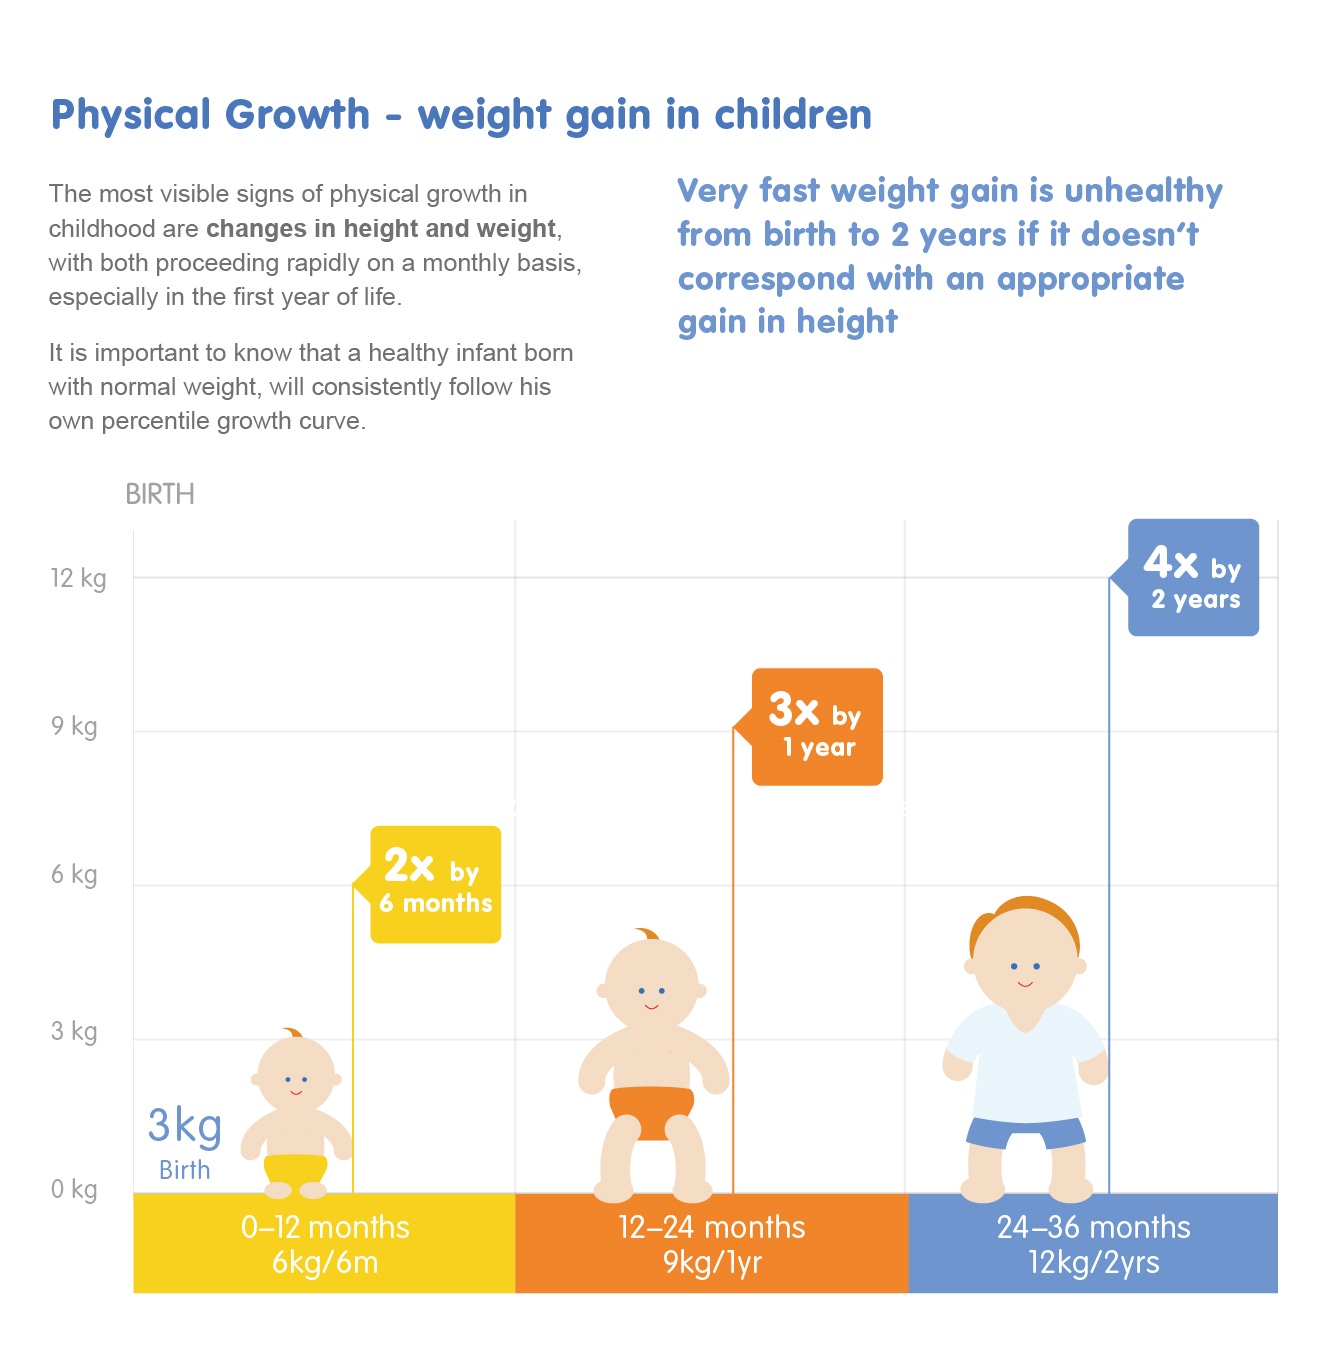 Infographics on physical growth and weight gain in children